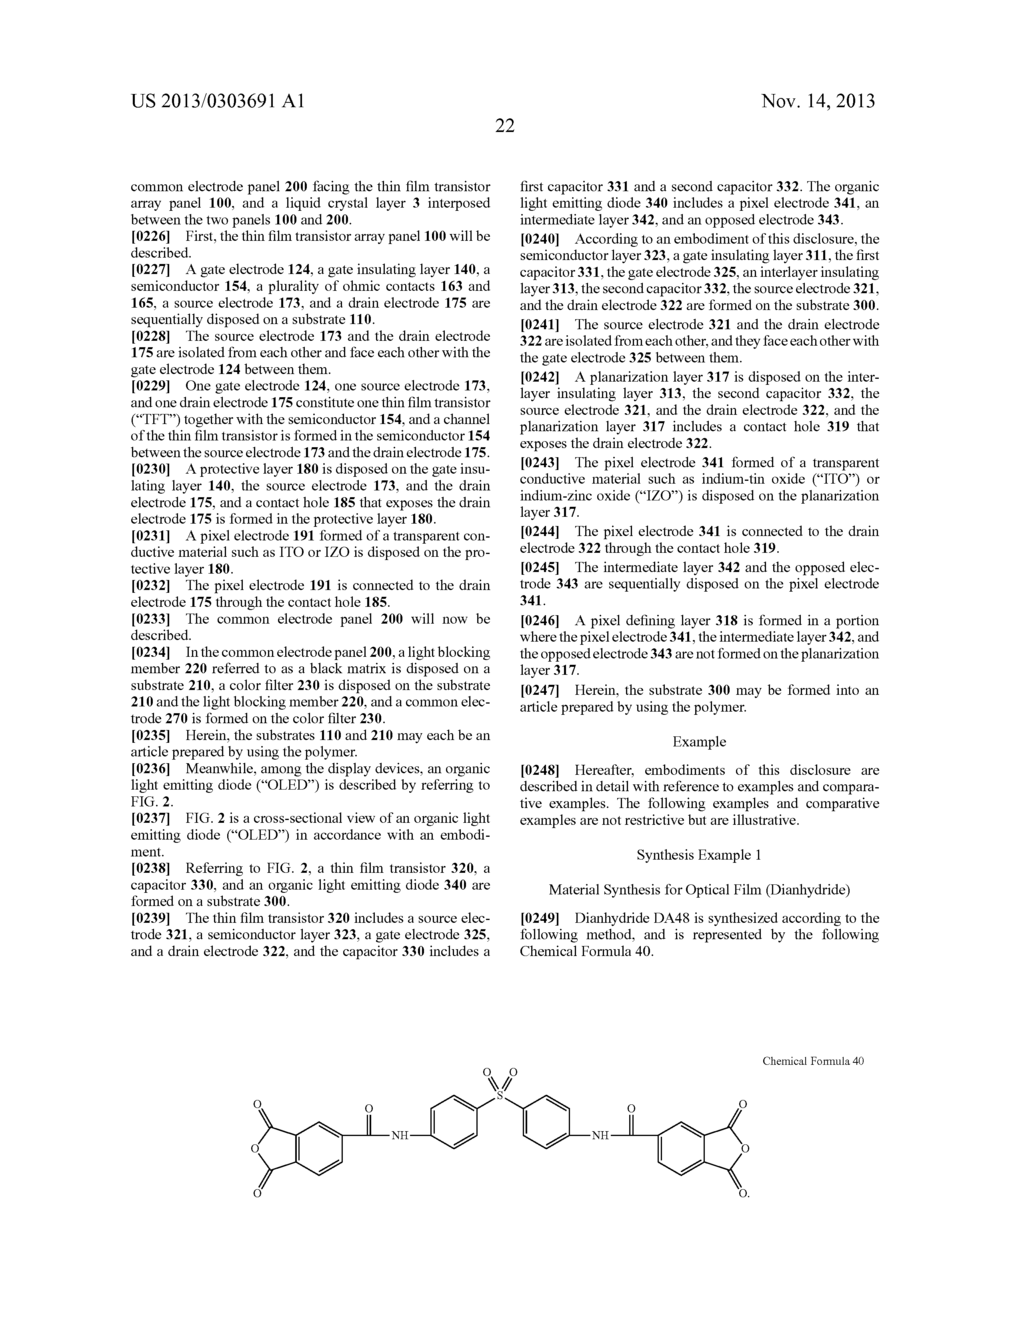 NOVEL MATERIAL FOR OPTICAL FILM, POLYMER, ARTICLE PREPARED BY USING THE     POLYMER, AND DISPLAY DEVICE INCLUDING THE ARTICLE - diagram, schematic, and image 27